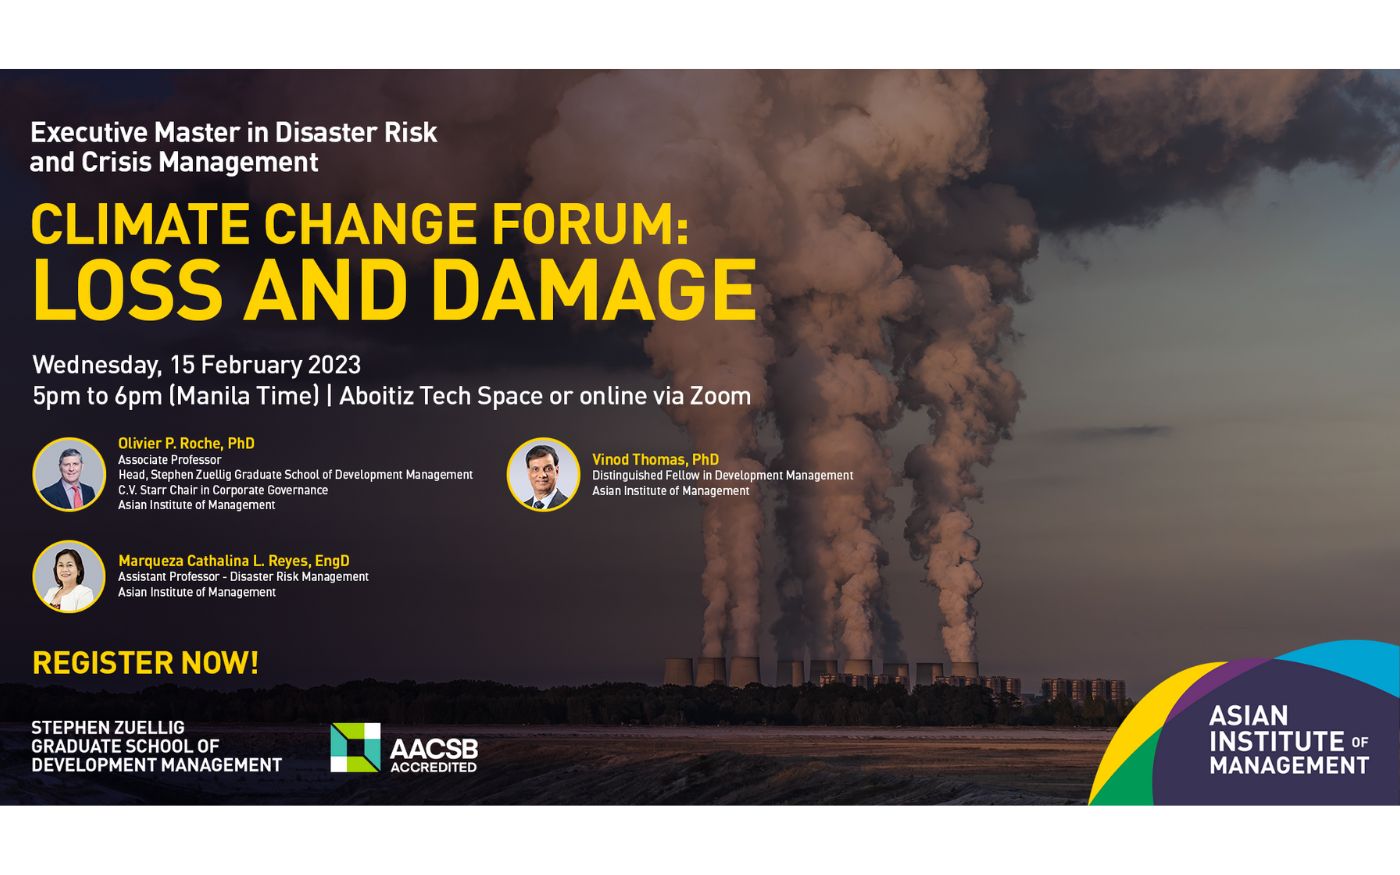 Climate Change Forum: Loss and Damage